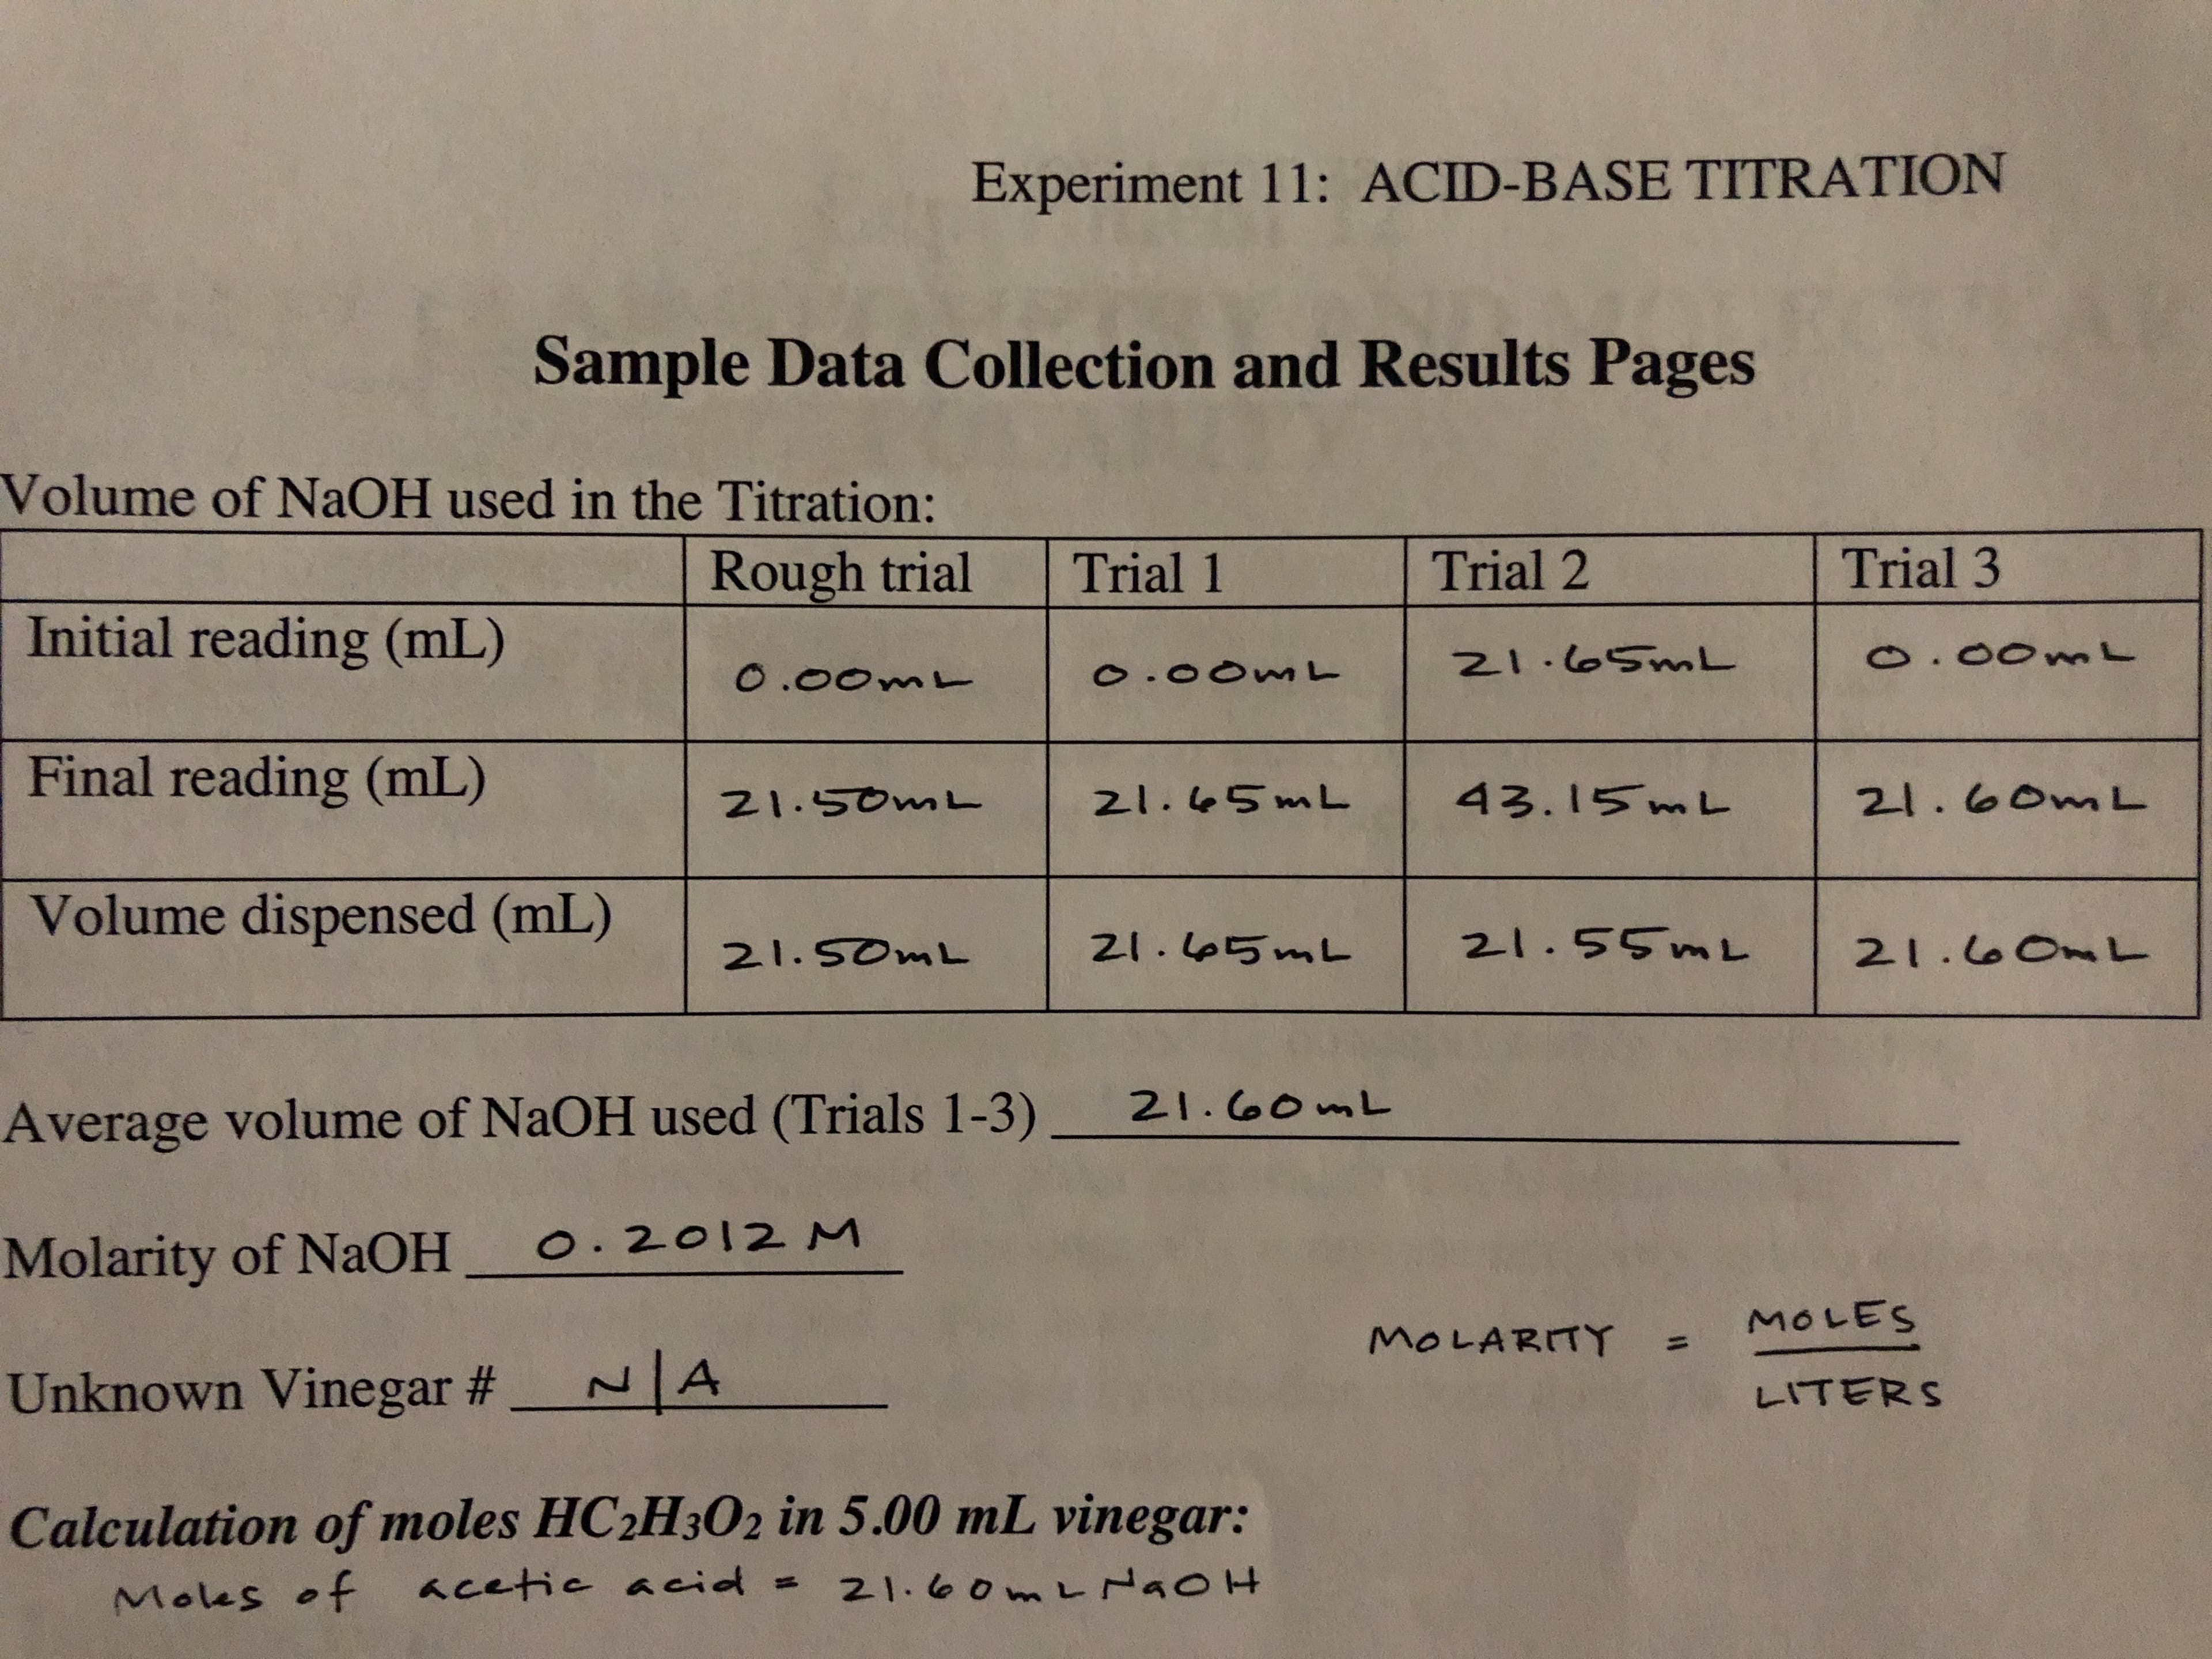 Experiment 11: ACID-BASE TITRATION
Sample Data Collection and Results Pages
Volume of NaOH used in the Titration:
Trial 3
Rough trial
Trial 2
Trial 1
Initial reading (mL)
o.00mL
21.0SML
O .0om
o.00ML
Final reading (mL)
43.15 mL
2l.6om L
z1.45ML
Z1.50ML
Volume dispensed (mL)
21.55ML
21.Lo5mL
21.6OnL
21.SOML
21.OomL
Average volume of NAOH used (Trials 1-3)
O.2012 M
Molarity of NaOH
MOLES
MOLARITY
N A
Unknown Vinegar #
LITERS
Calculation of moles HC2H302 in 5.00 mL vinegar:
21.6om L NaoH
Moles of cetie acid
